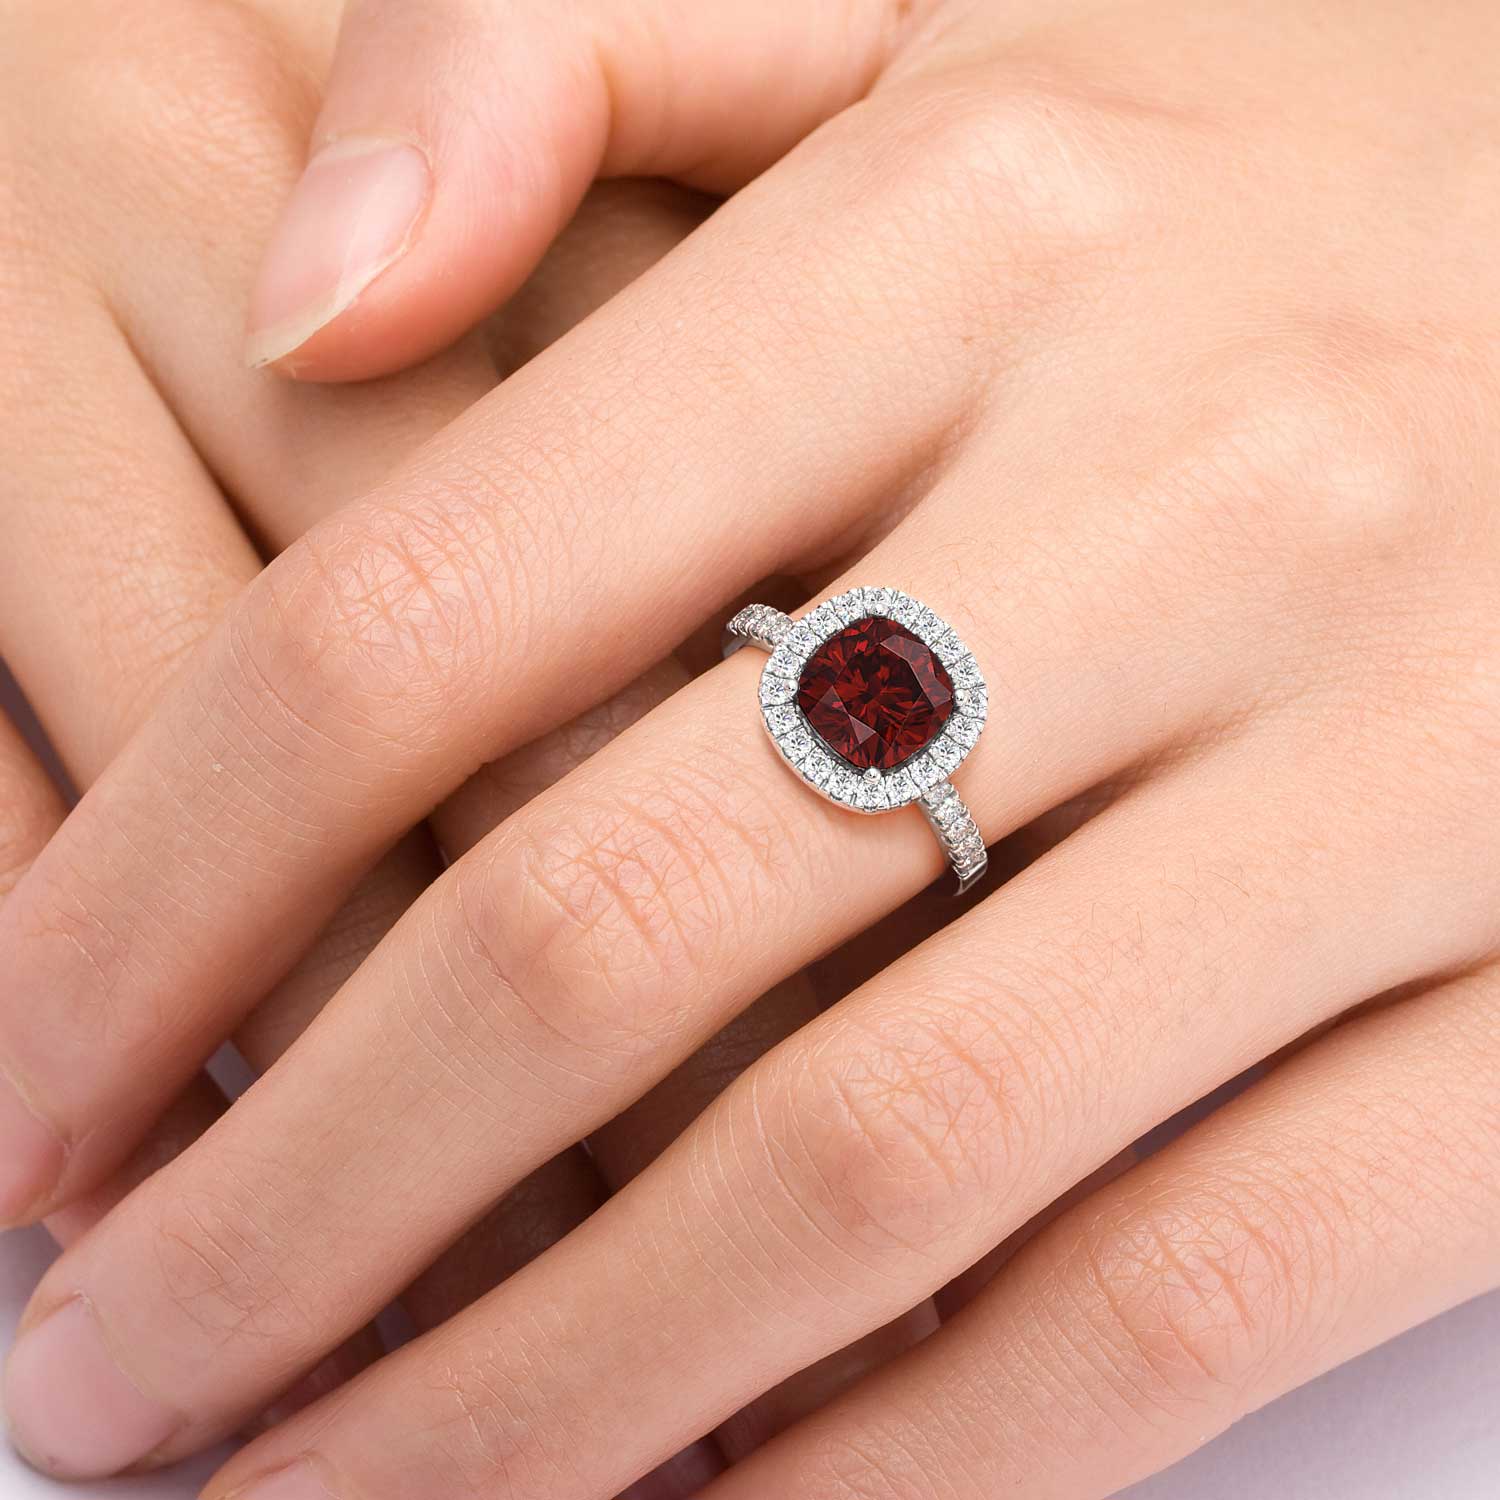 A beautiful cushion-cut garnet halo ring, elegantly displayed on the hand. The deep red hue of the garnet gemstone, surrounded by a halo of shimmering diamonds, adds a touch of sophistication and allure to any ensemble.